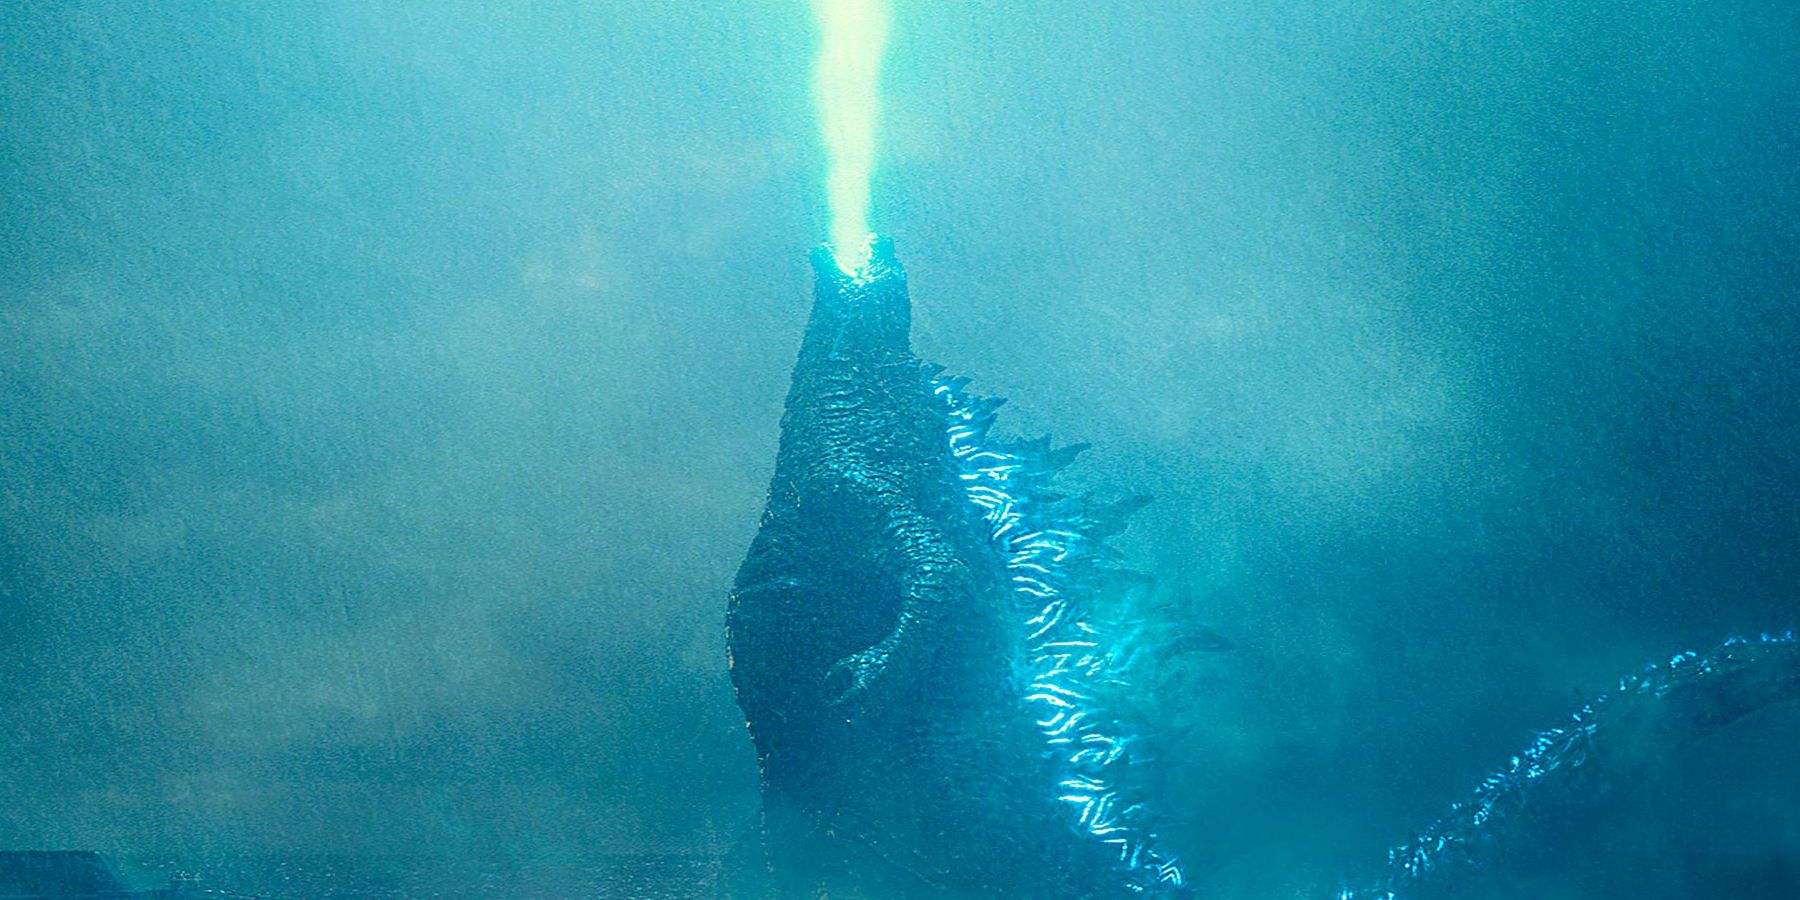 Every Upcoming Godzilla Movie After King of the Monsters